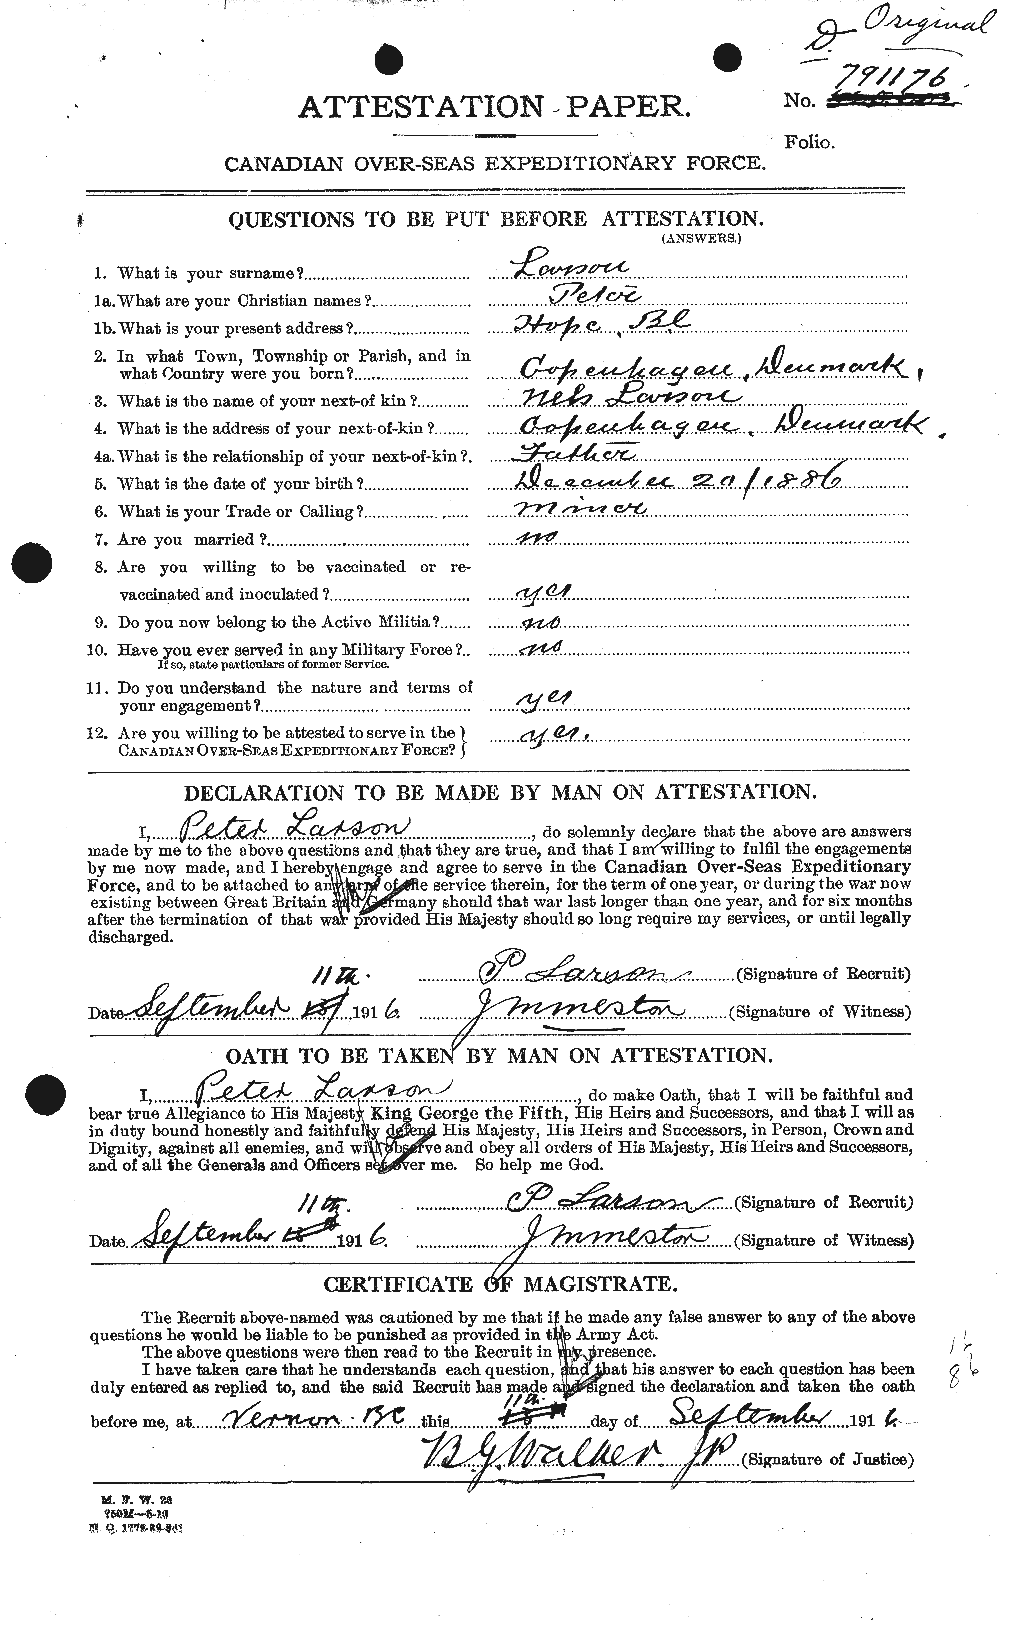 Personnel Records of the First World War - CEF 451761a